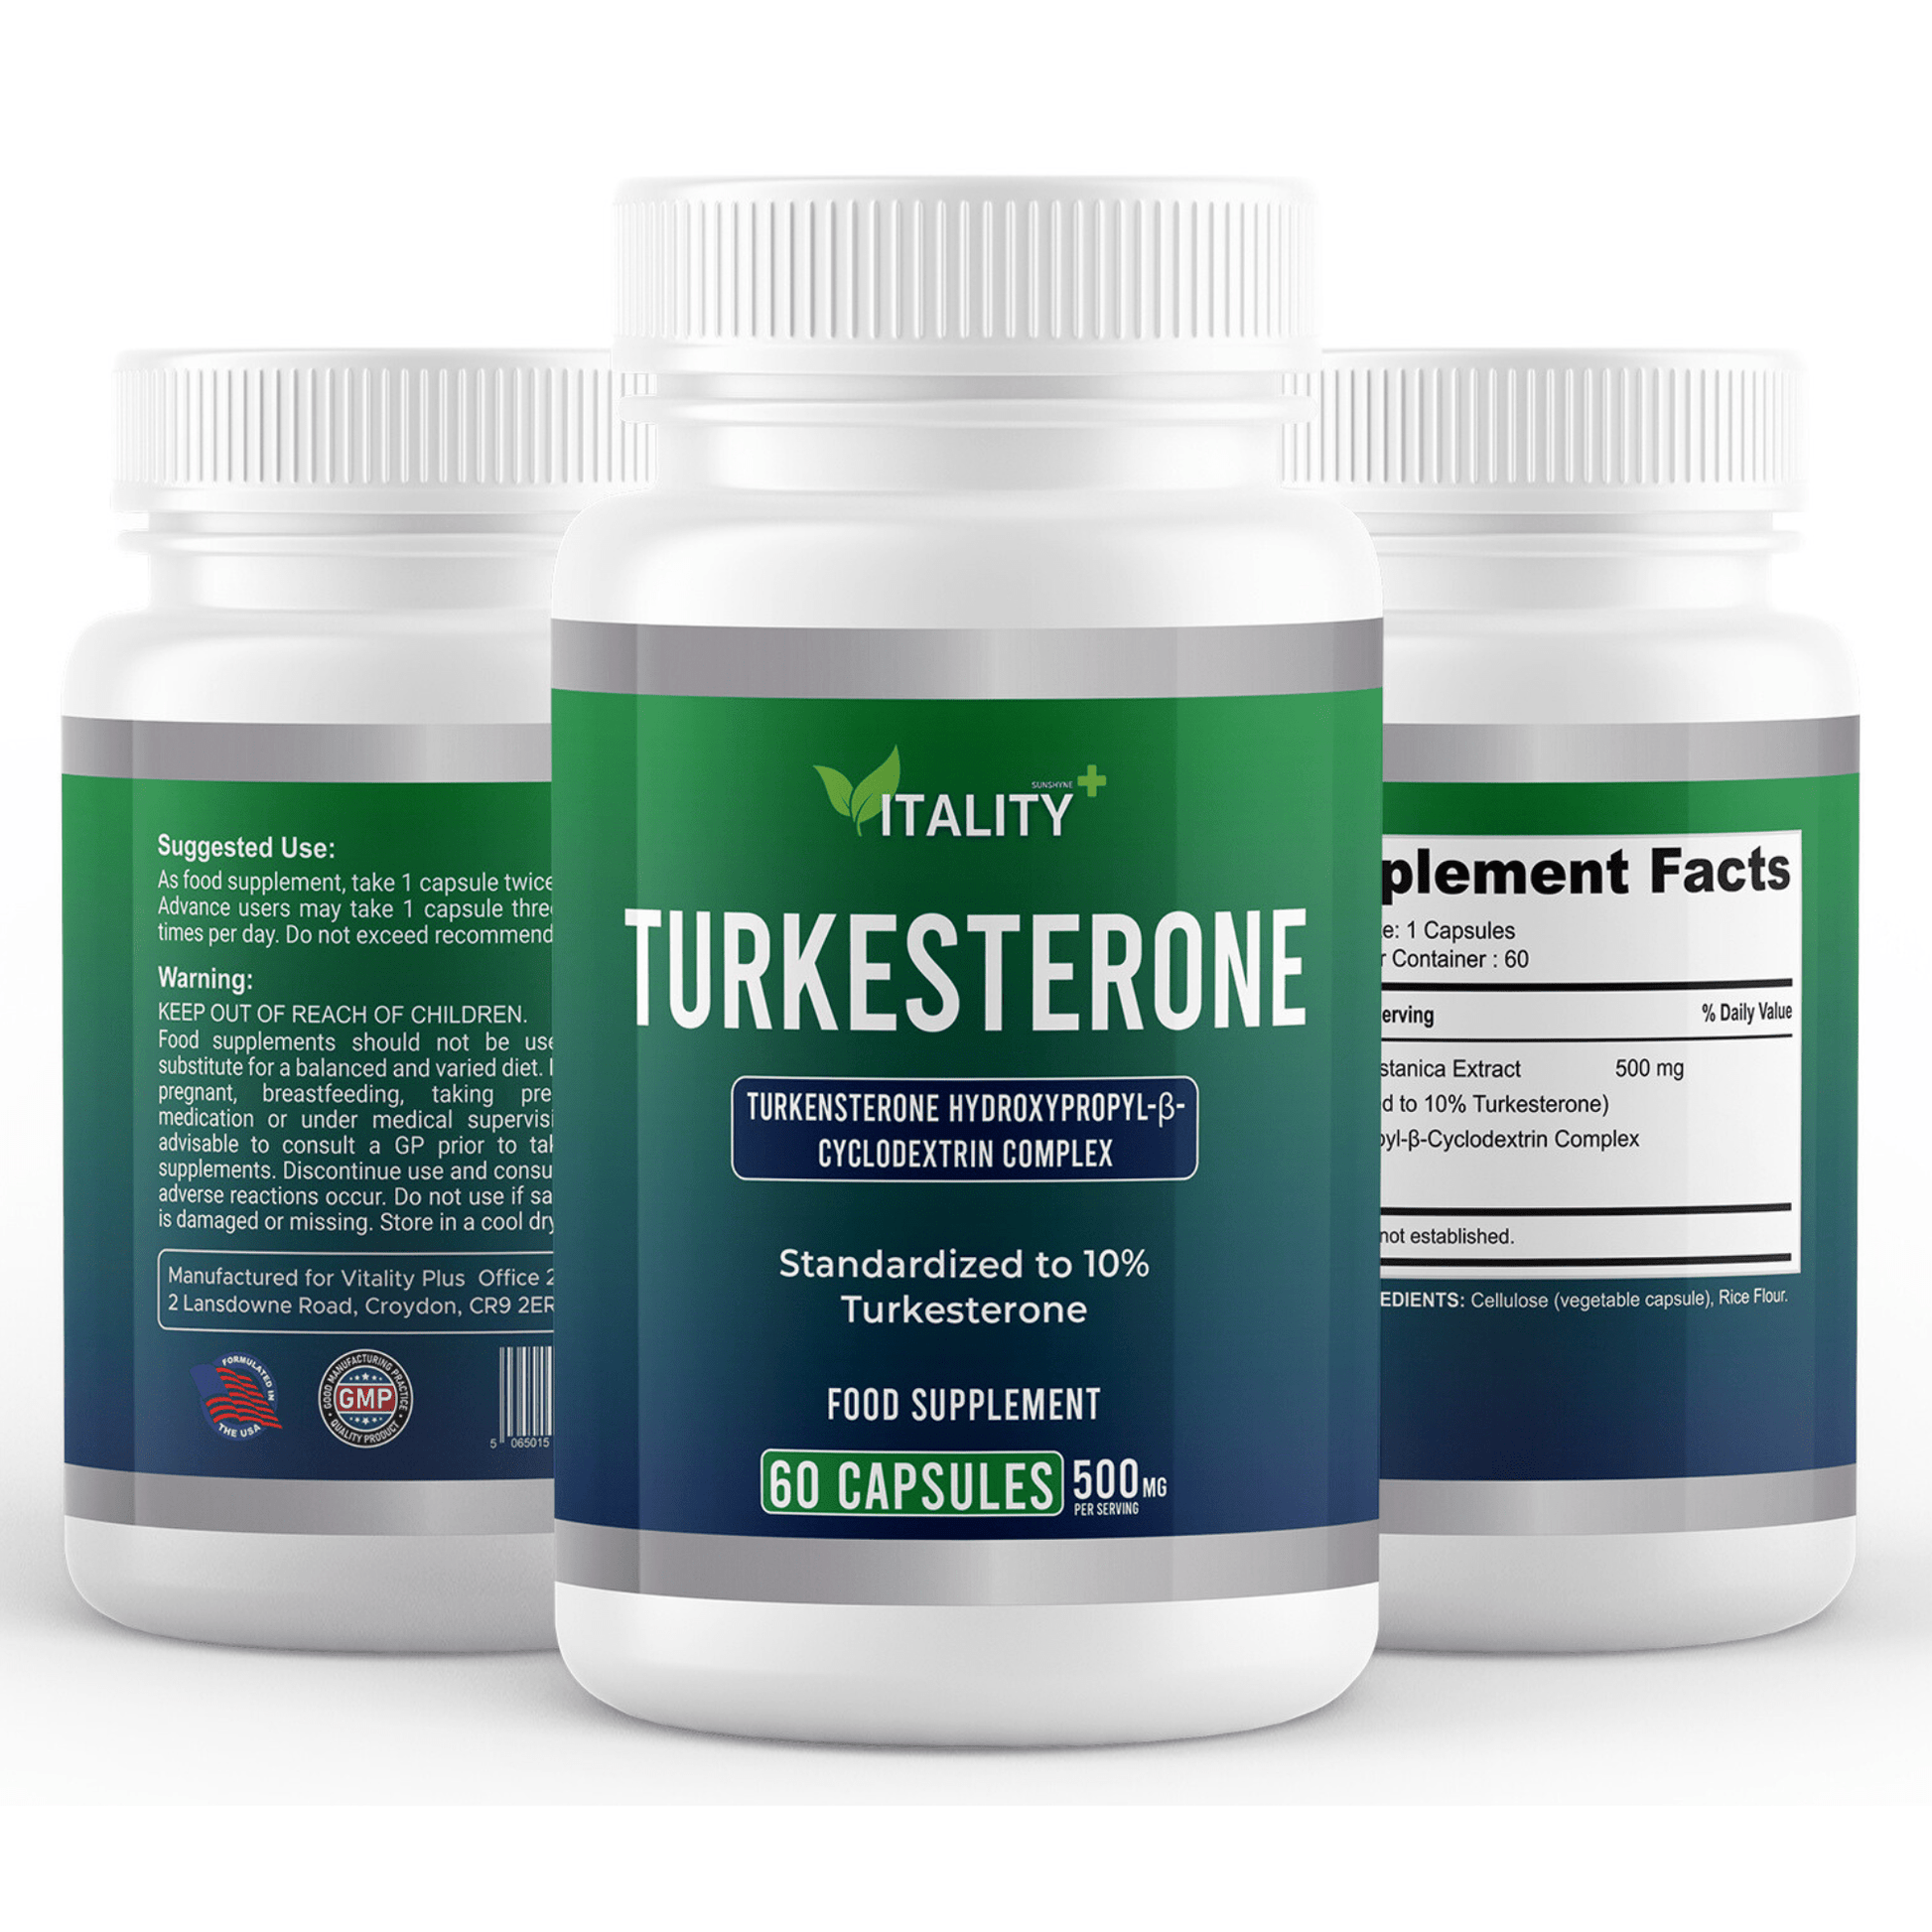 High Strength Turkesterone 500mg | 60 Capsules | 1 Month Supply - Vitality Supplements